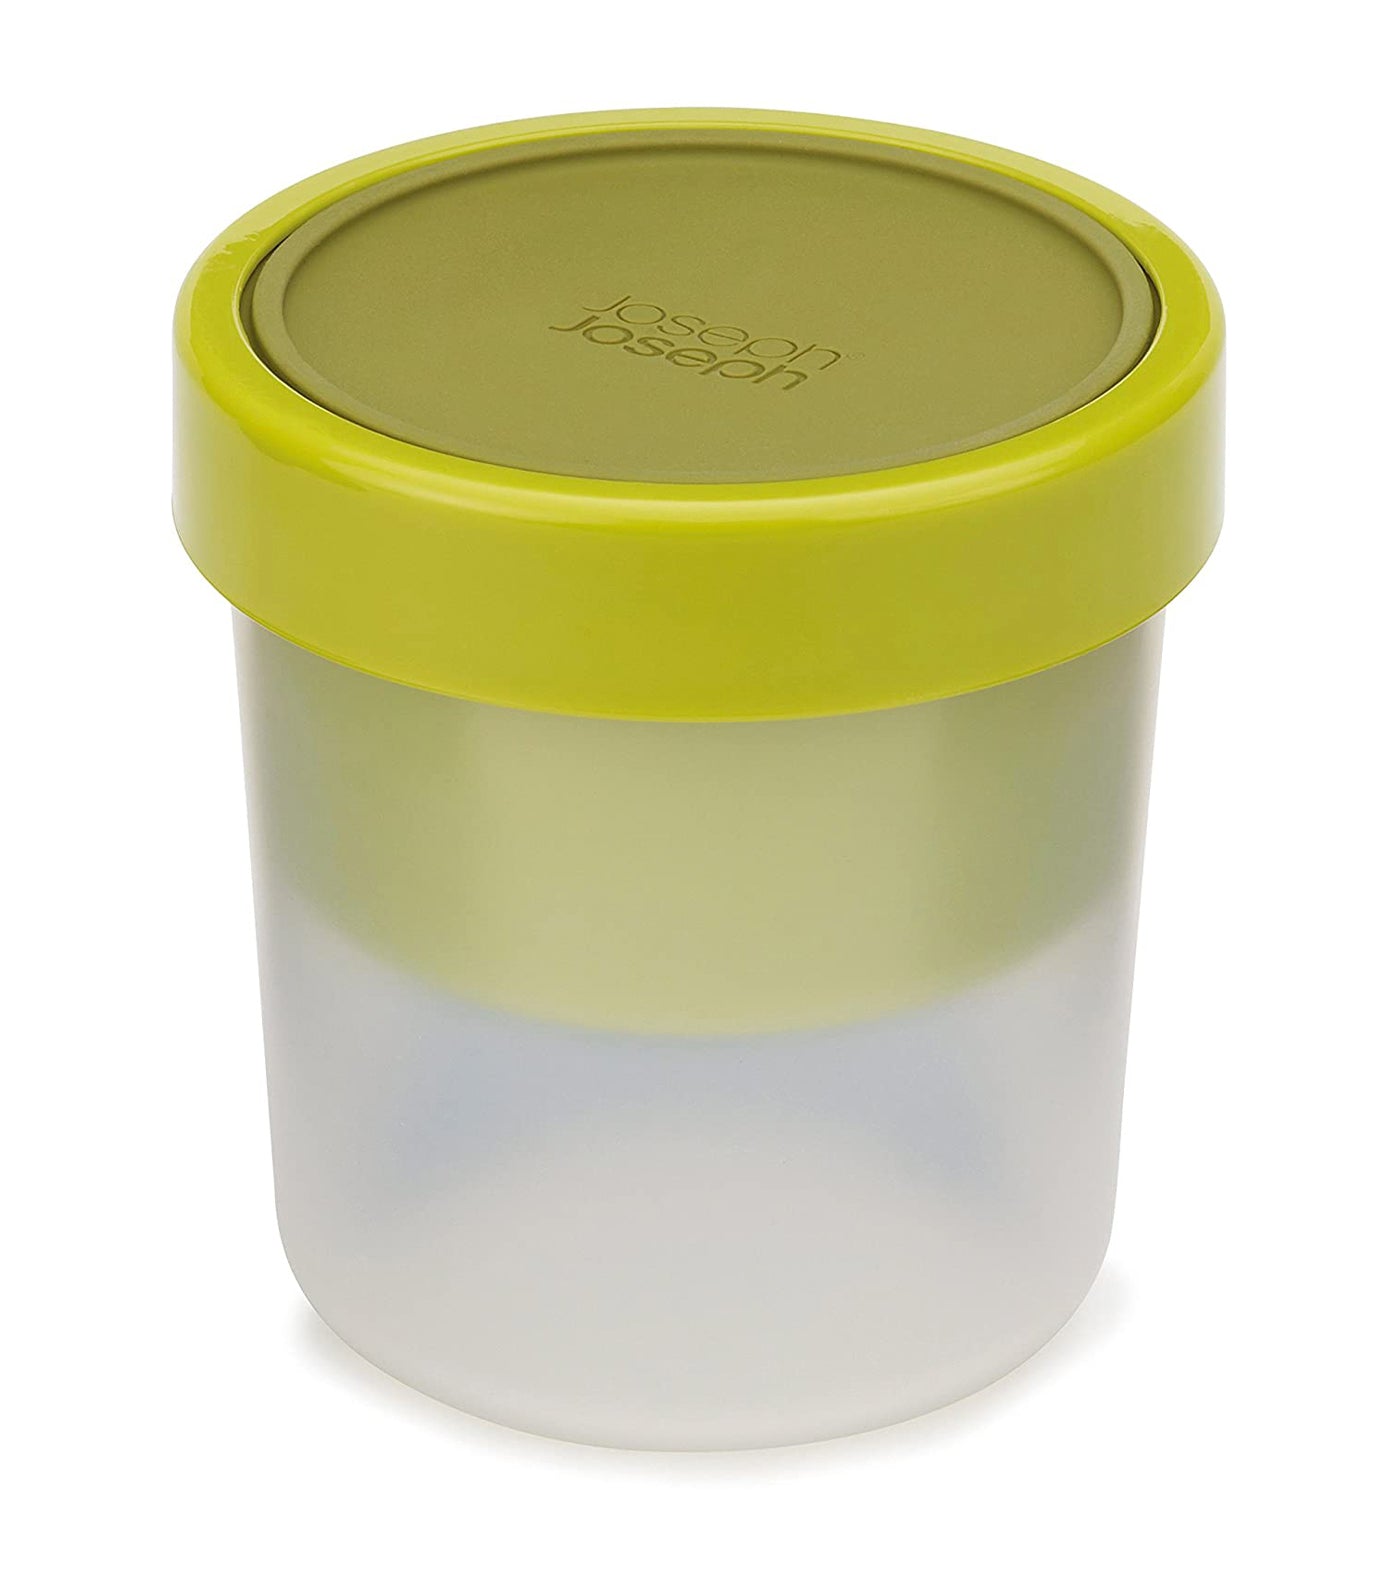 Go Eat Compact 2-in-1 Soup Pot Green